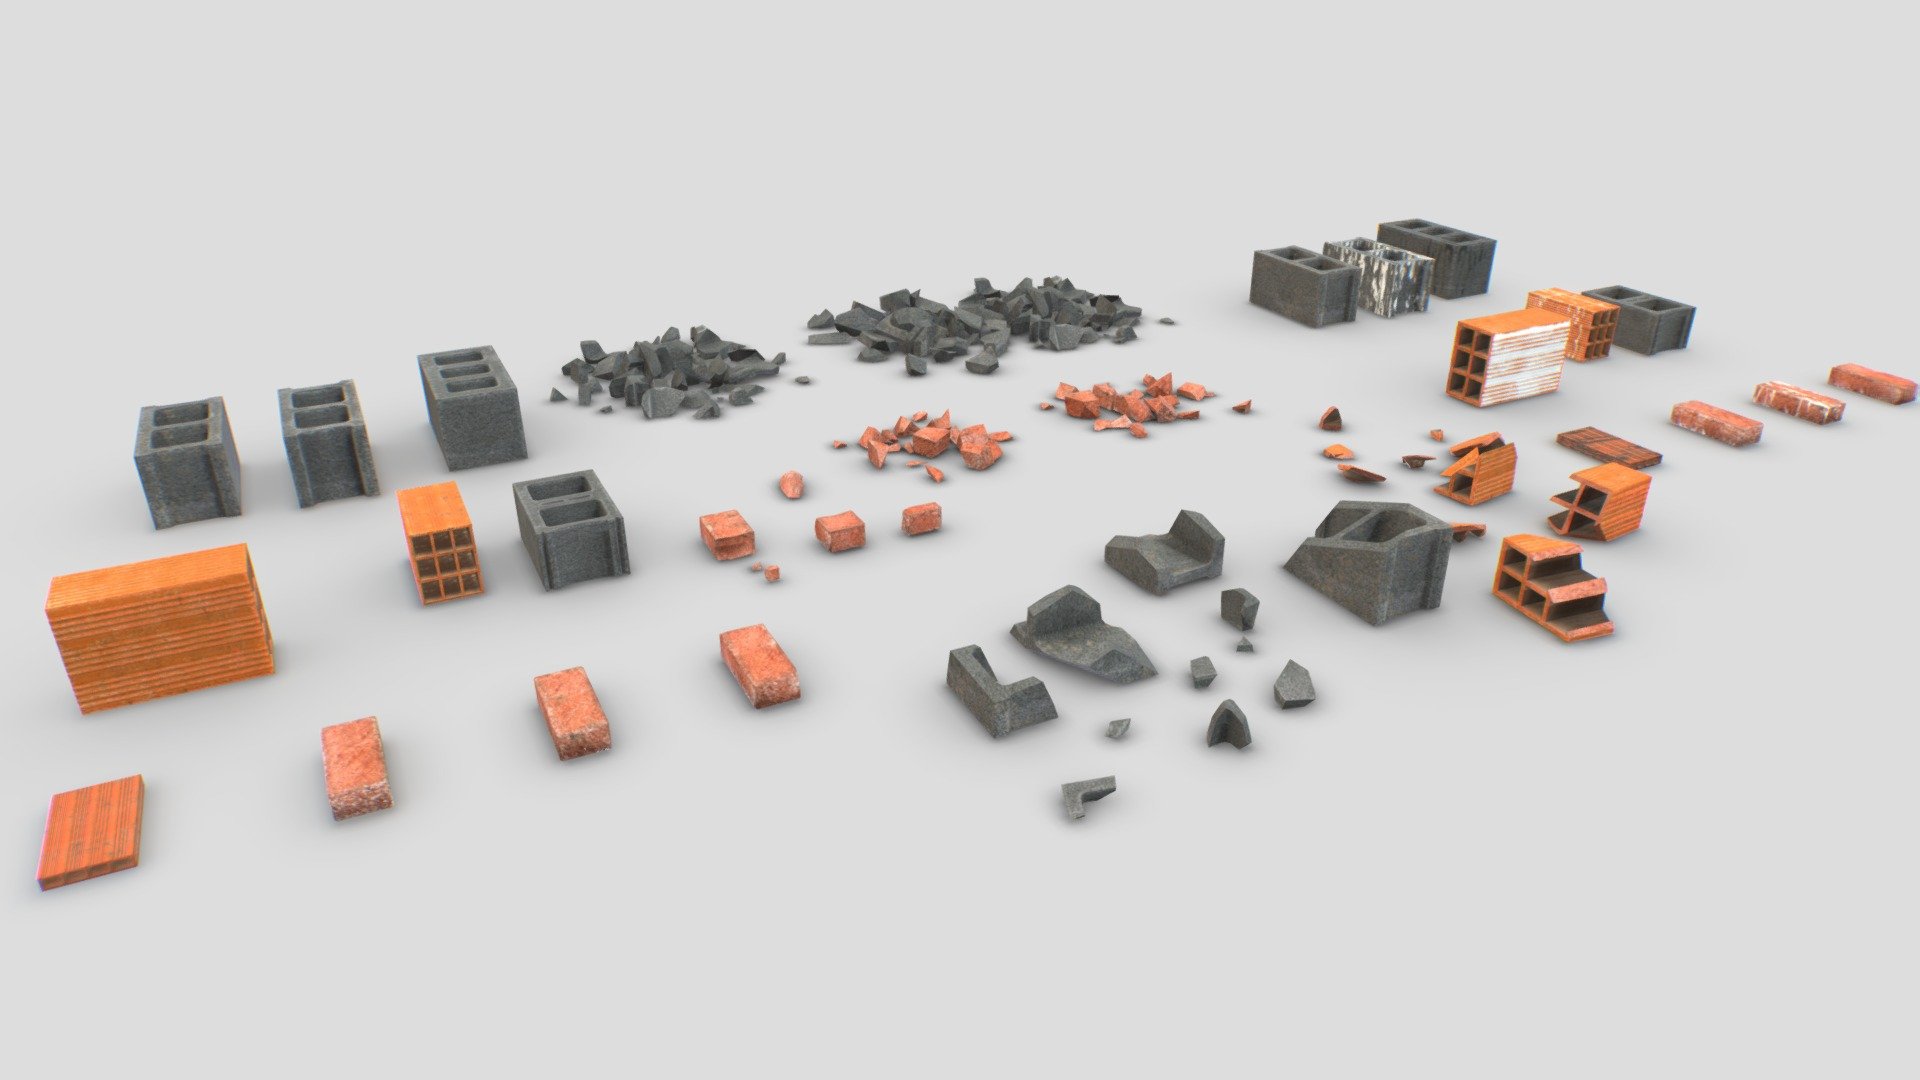 Pack of bricks and debris . Realistic scale. Includes 42 objects, 10 bricks, 4 piles of debris and 28 broken brick pieces.

Each object comes with 2 texture sets (materials) for a total of 84 different objects and 2 materials. Each mesh use 1 material only.

PBR 4096x PBR textures including Albedo, Normal, Metalness, Roughness and AO. Unreal ARM mask texture included (ao, rough, metal). Also unity HDRP mask included.

4k verts and 12k tris in total 3d model